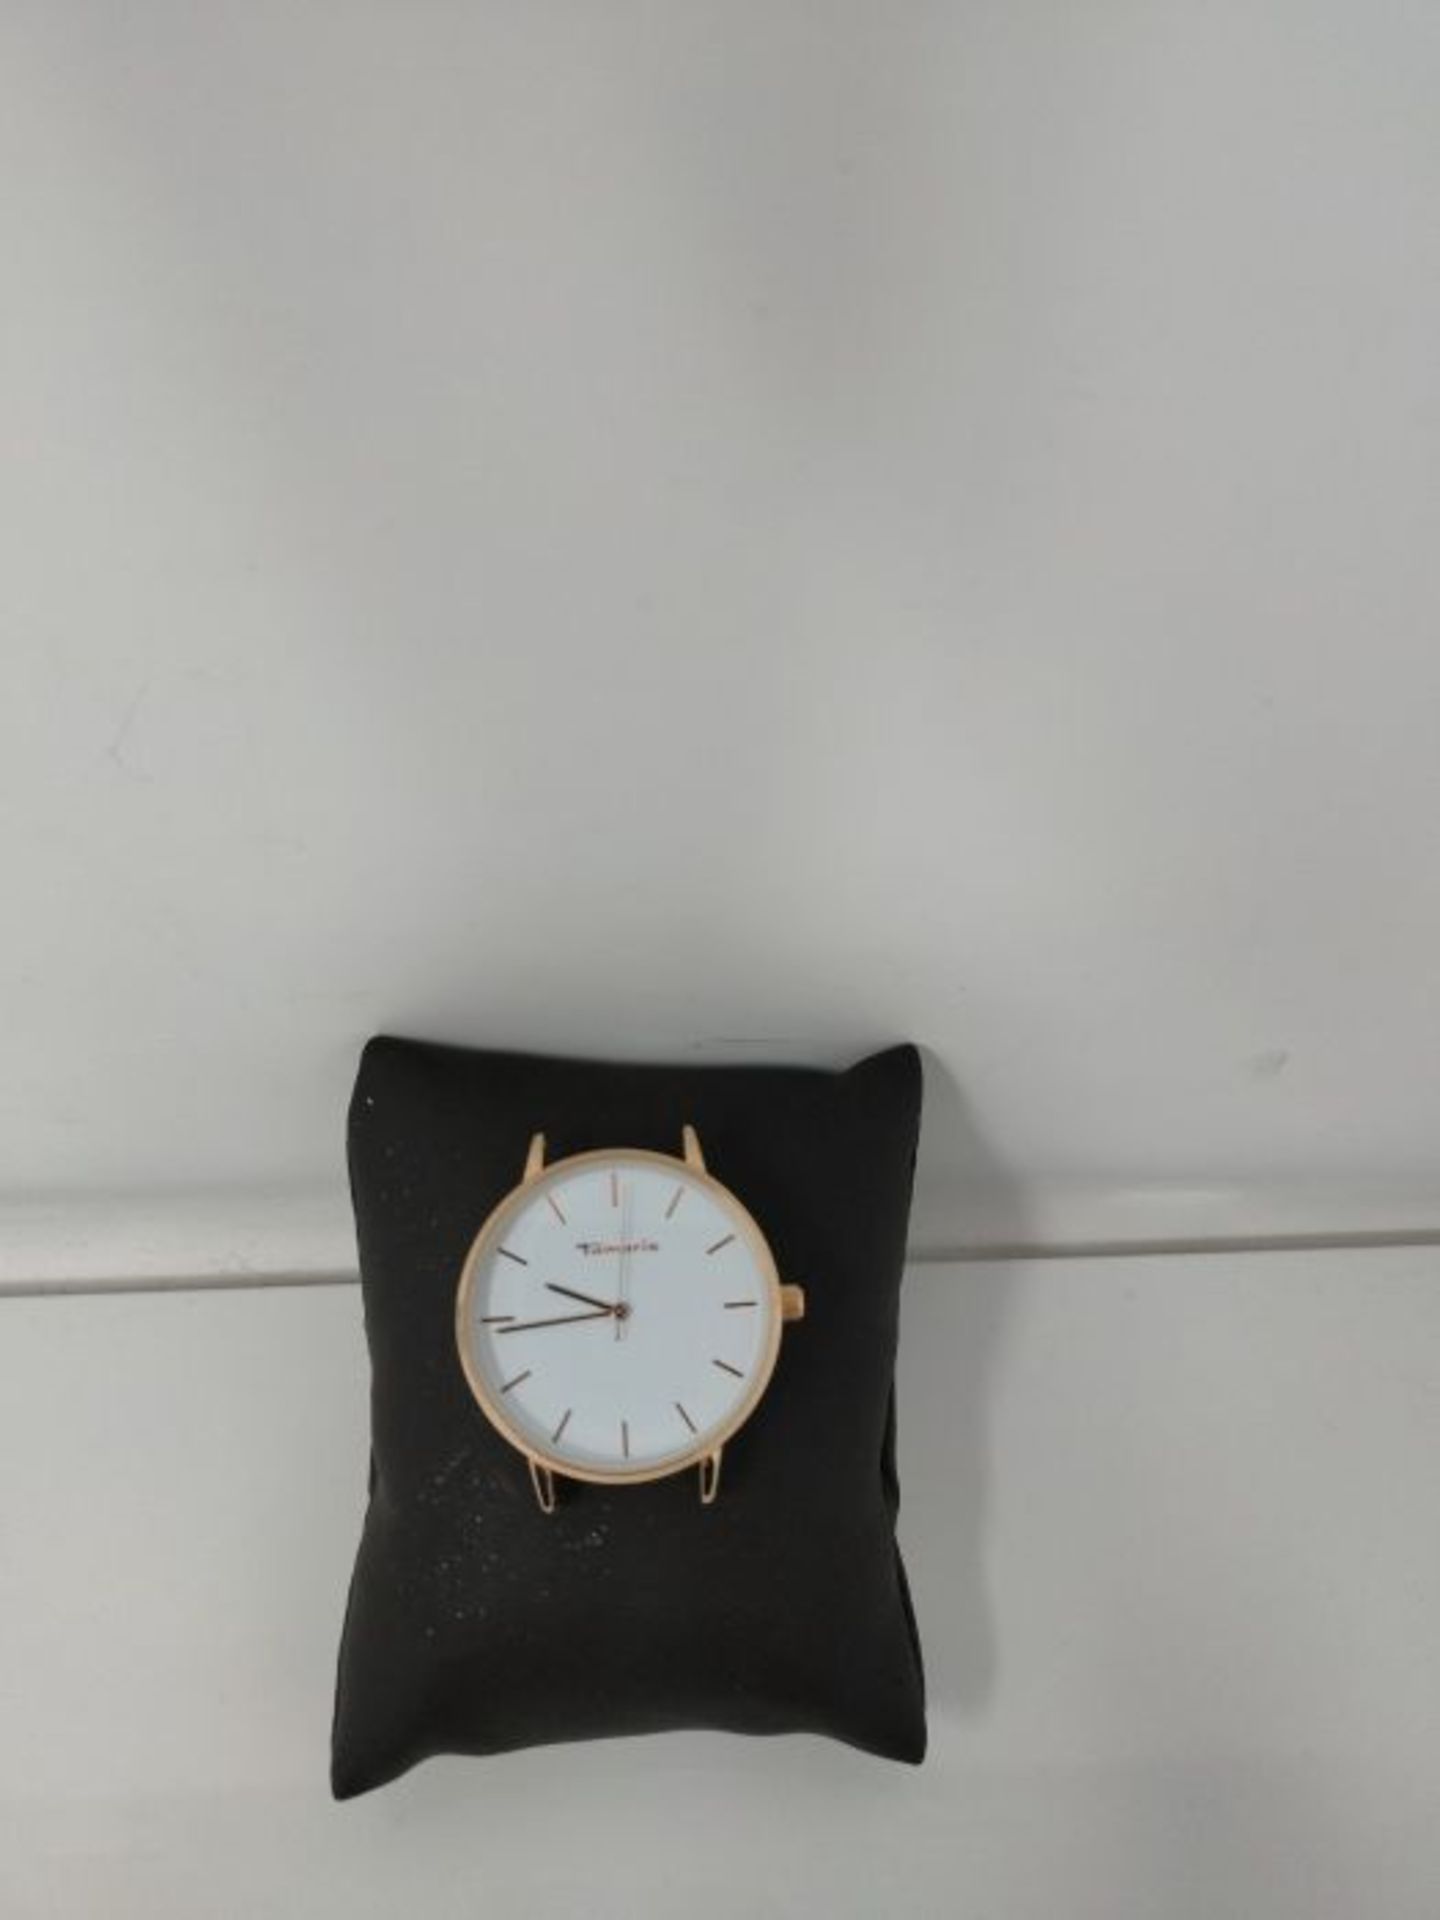 RRP £50.00 [INCOMPLETE] Tamaris Womens Analogue Quartz Watch with Leather Strap TT-0005-LQ - Image 3 of 3